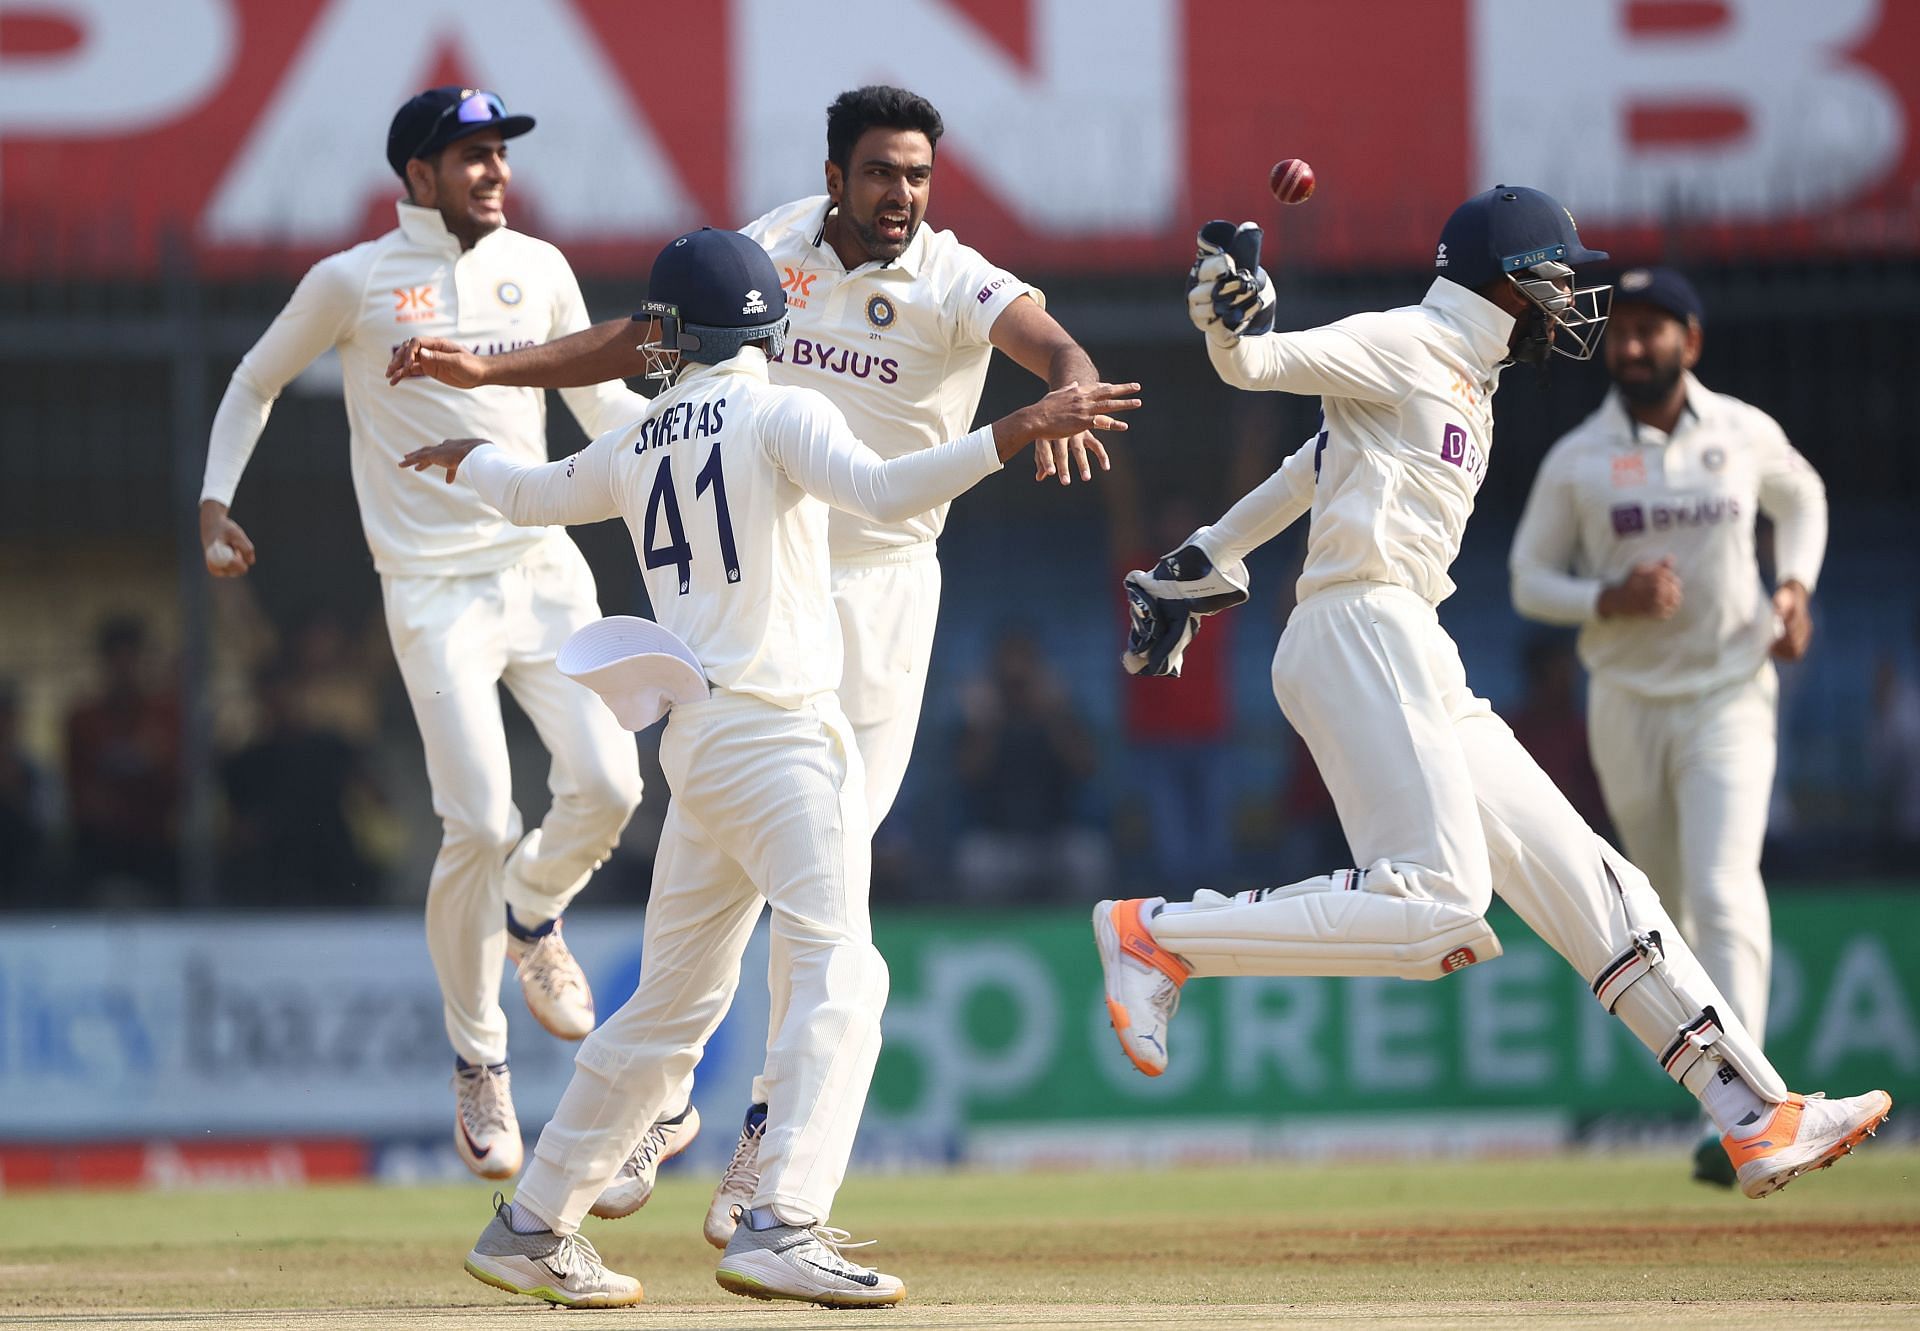 Ravichandran Ashwin took 300 Test wickets in just 54 Tests to set a new world record